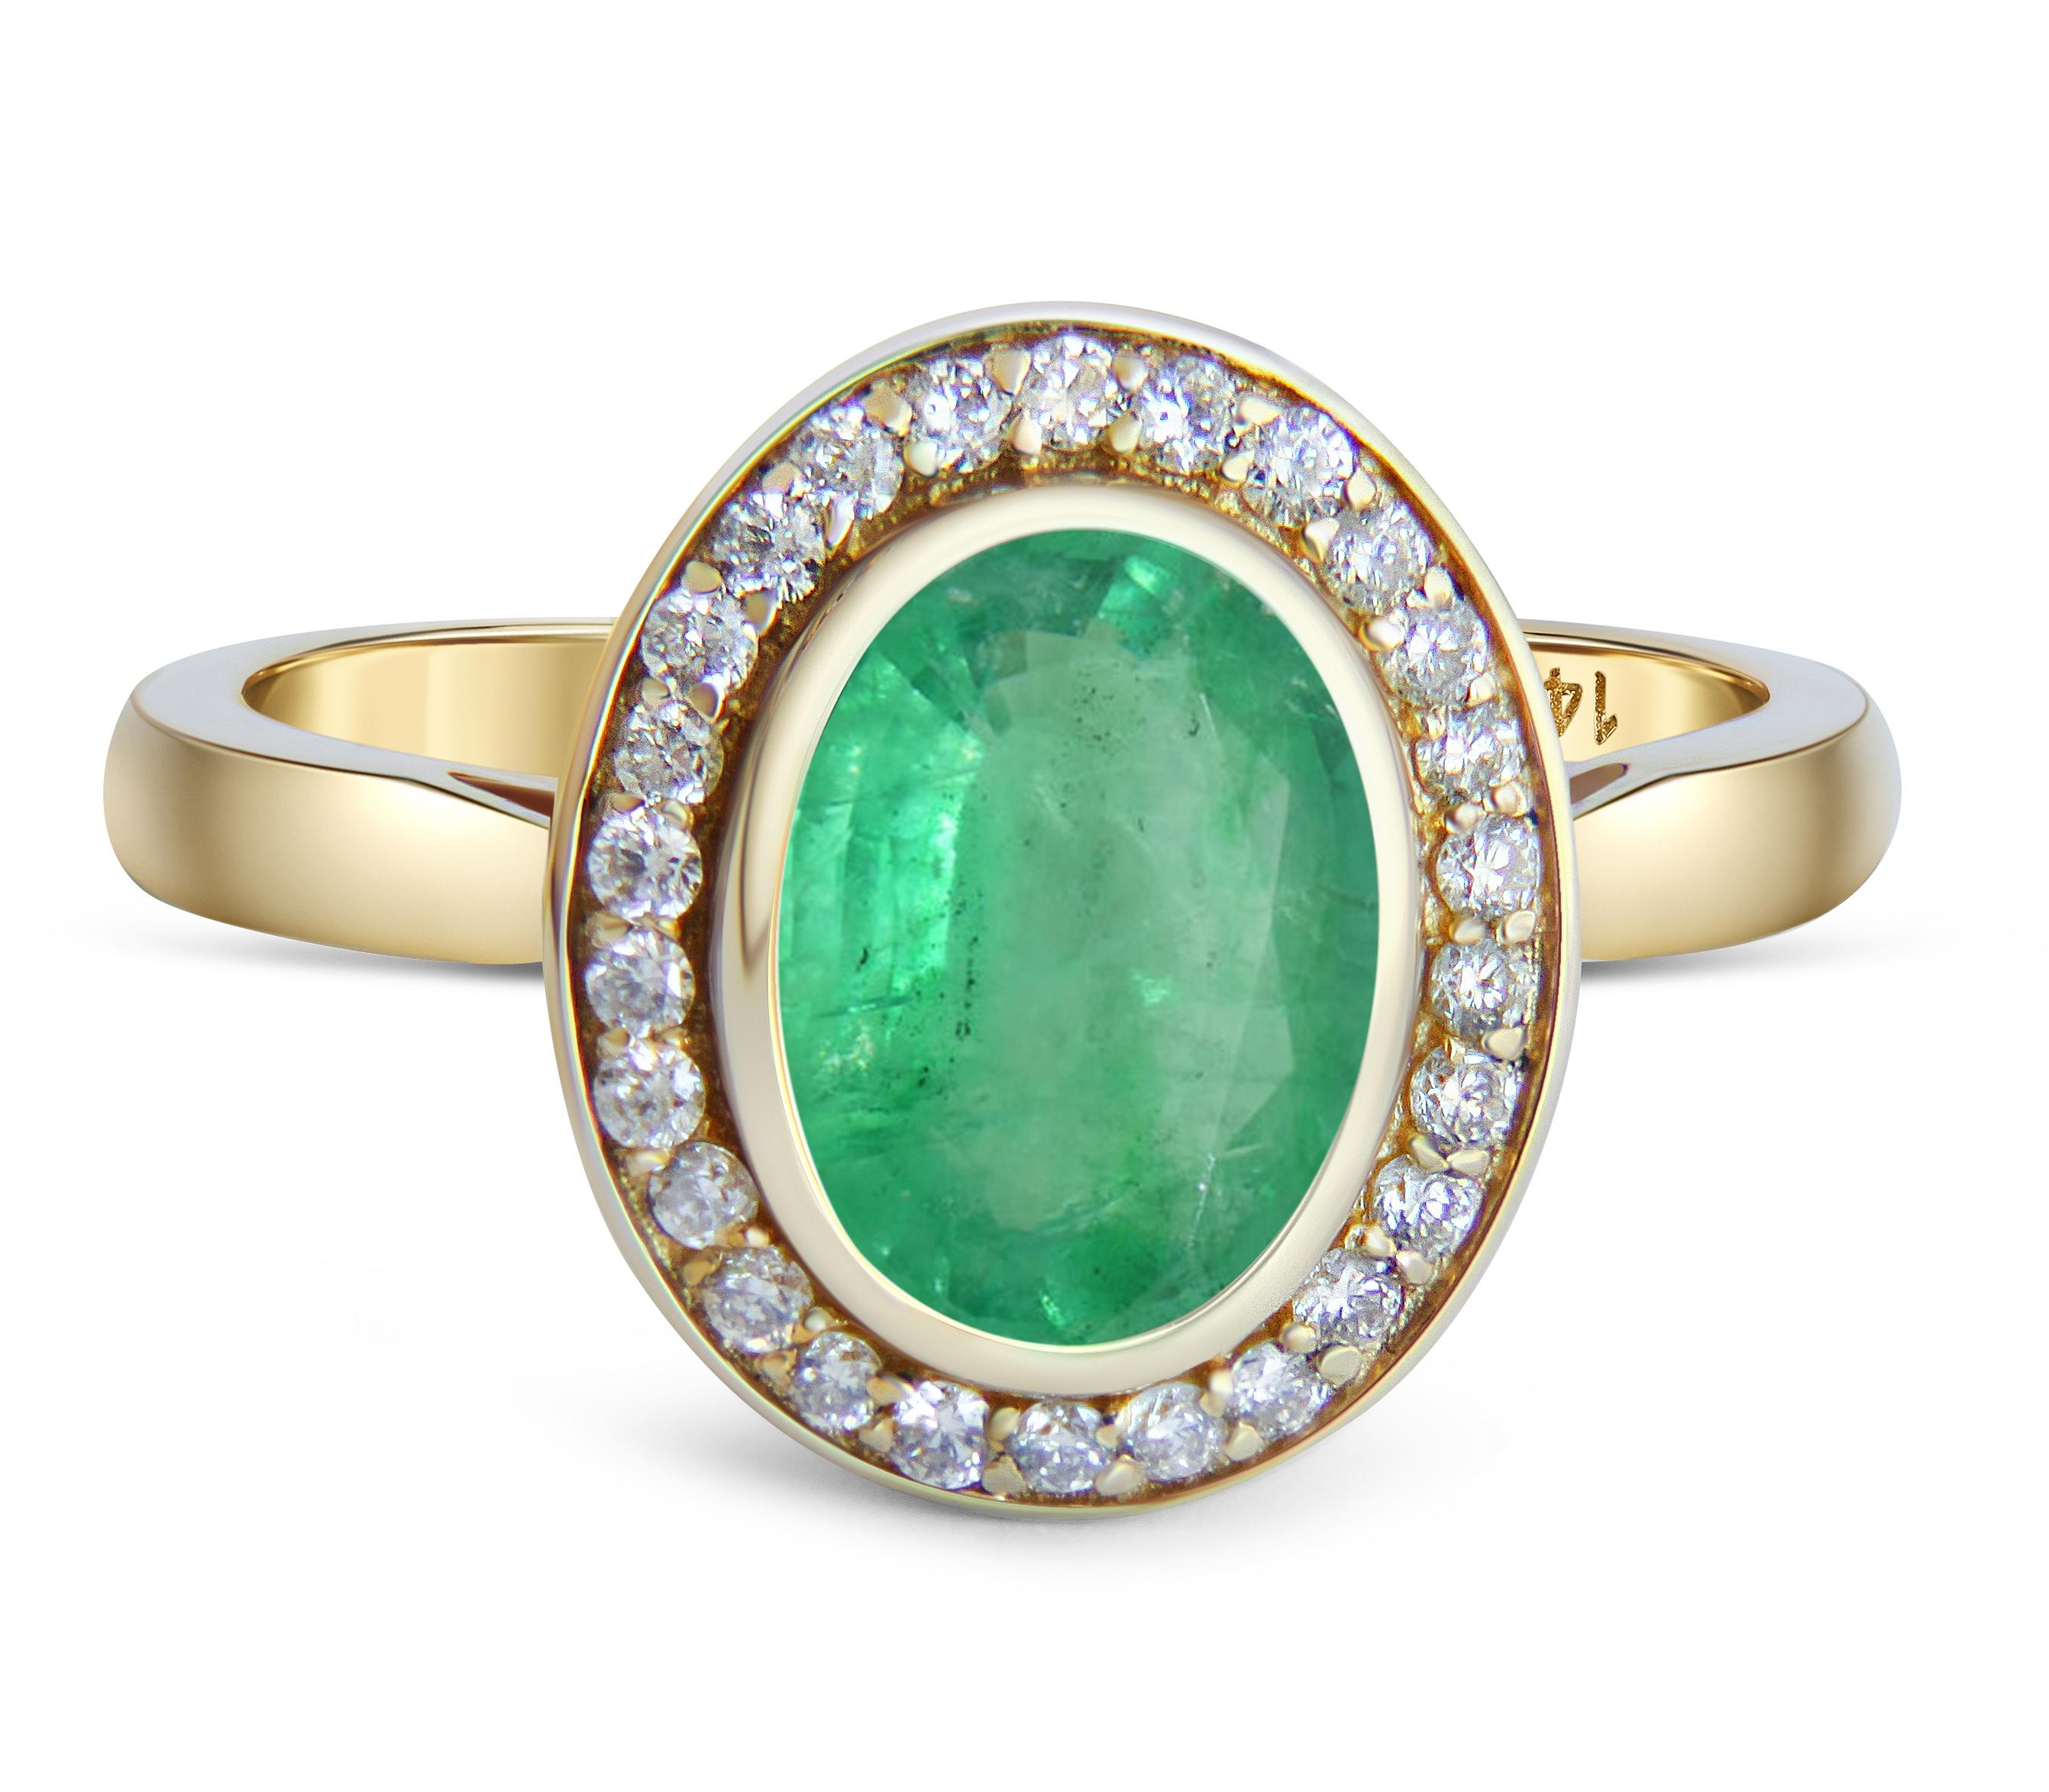 For Sale:  Emerald and diamonds 14k gold ring. 2